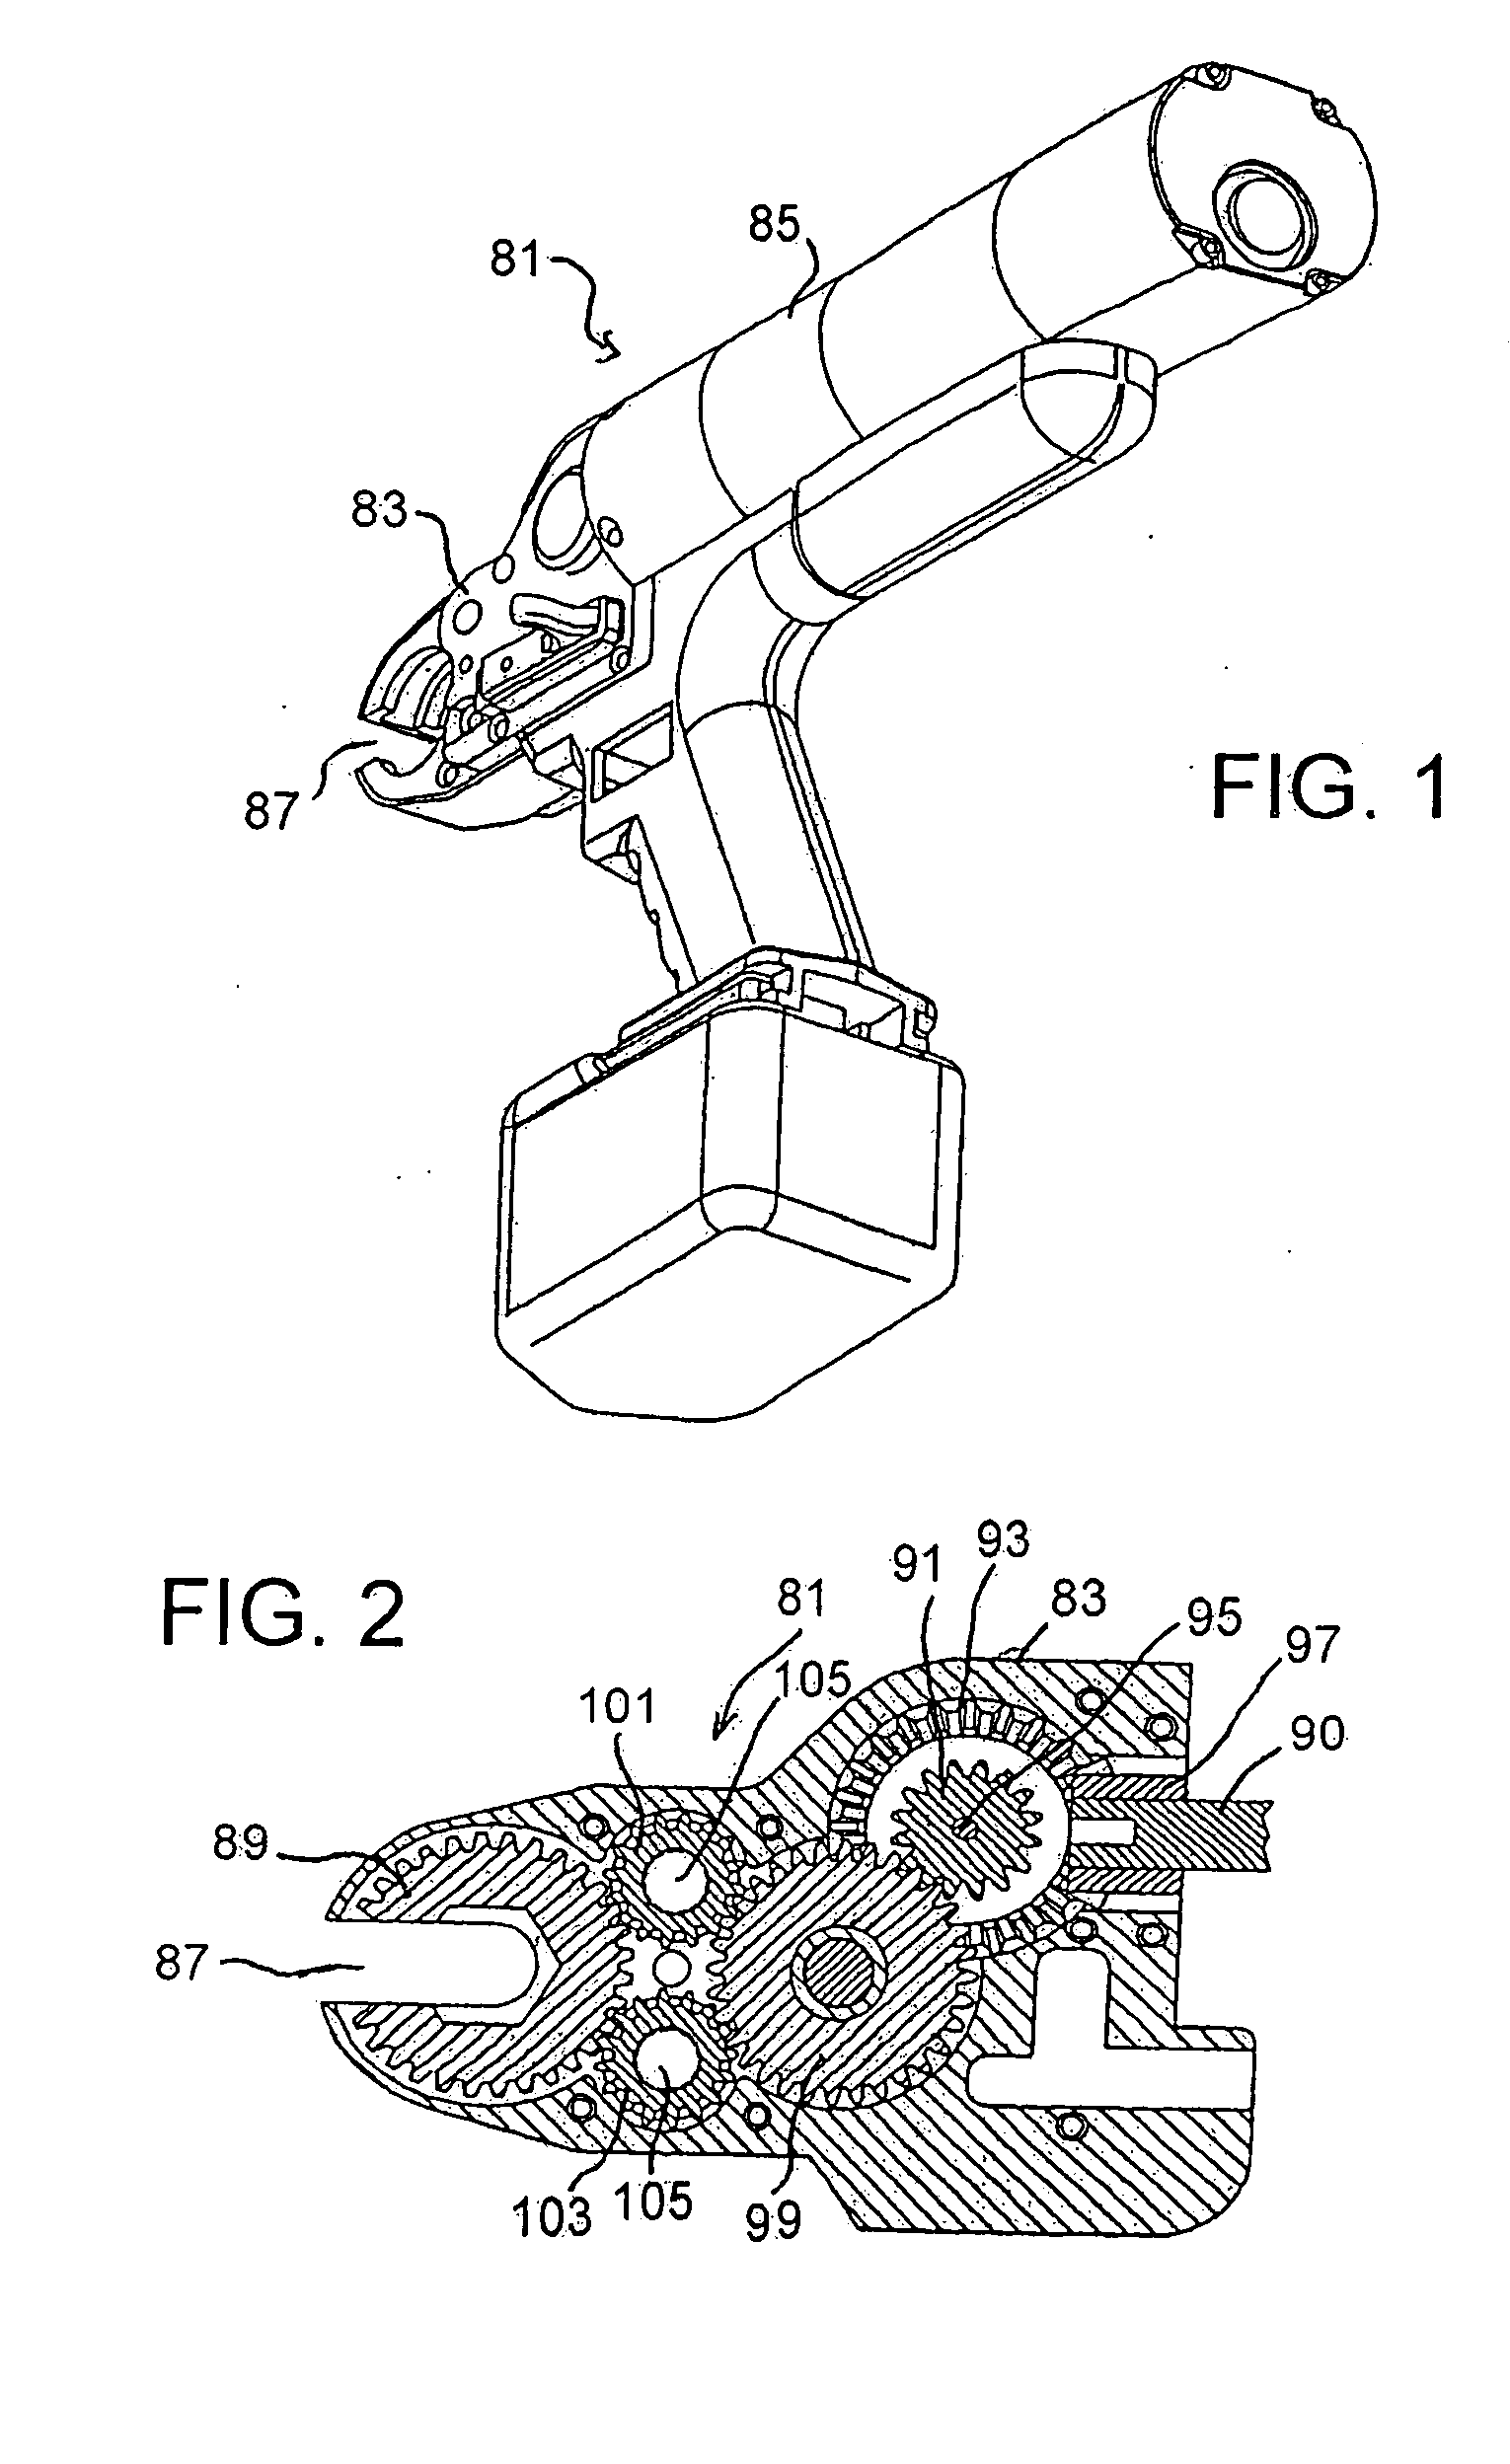 Utility tools and mounting adaptation for a nut driving tool and methods